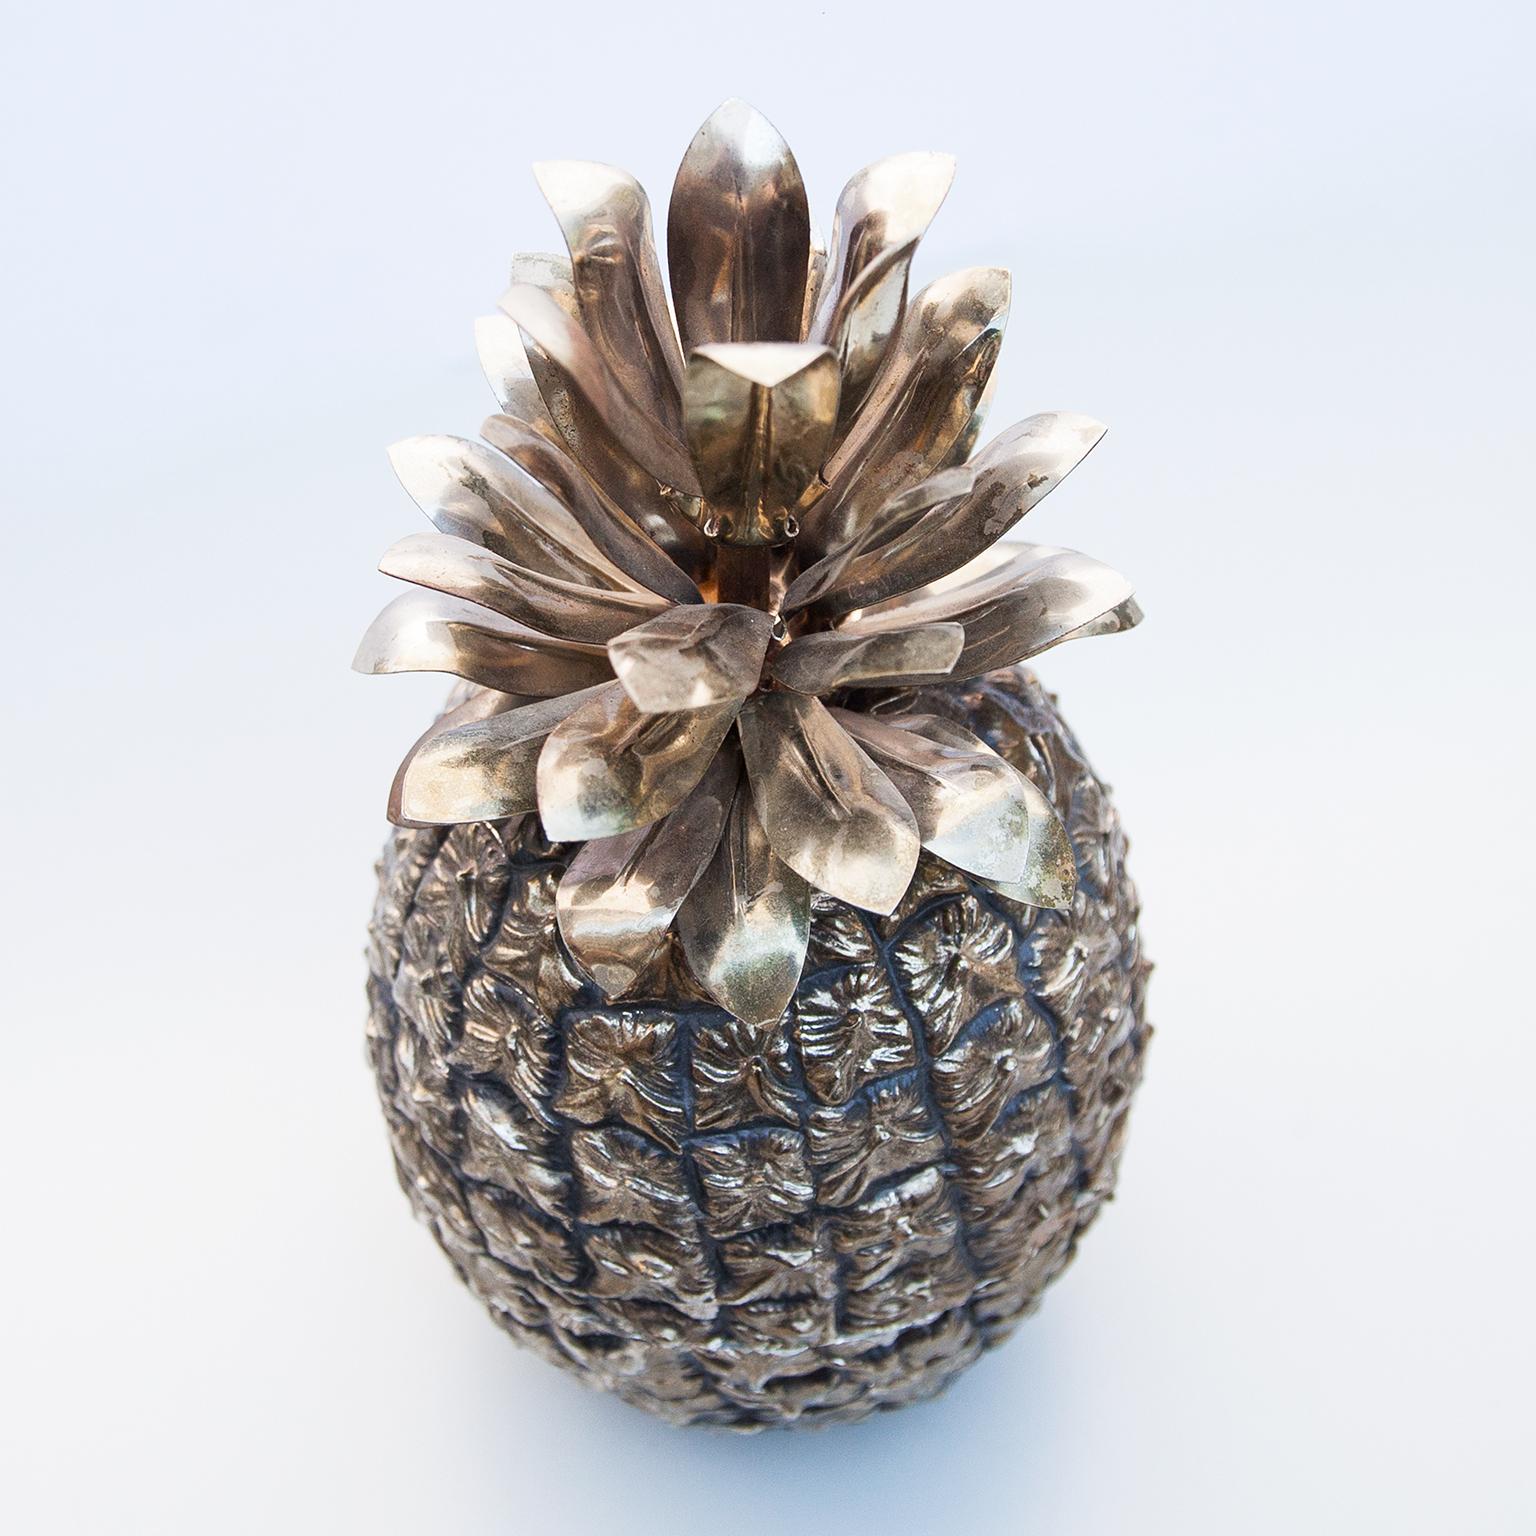 Golden colored ice bucket in shape of a pineapple. Manufactured by Freddo Therm and hans Turnwald, Switzerland, 1970s. Very exclusive and rare.